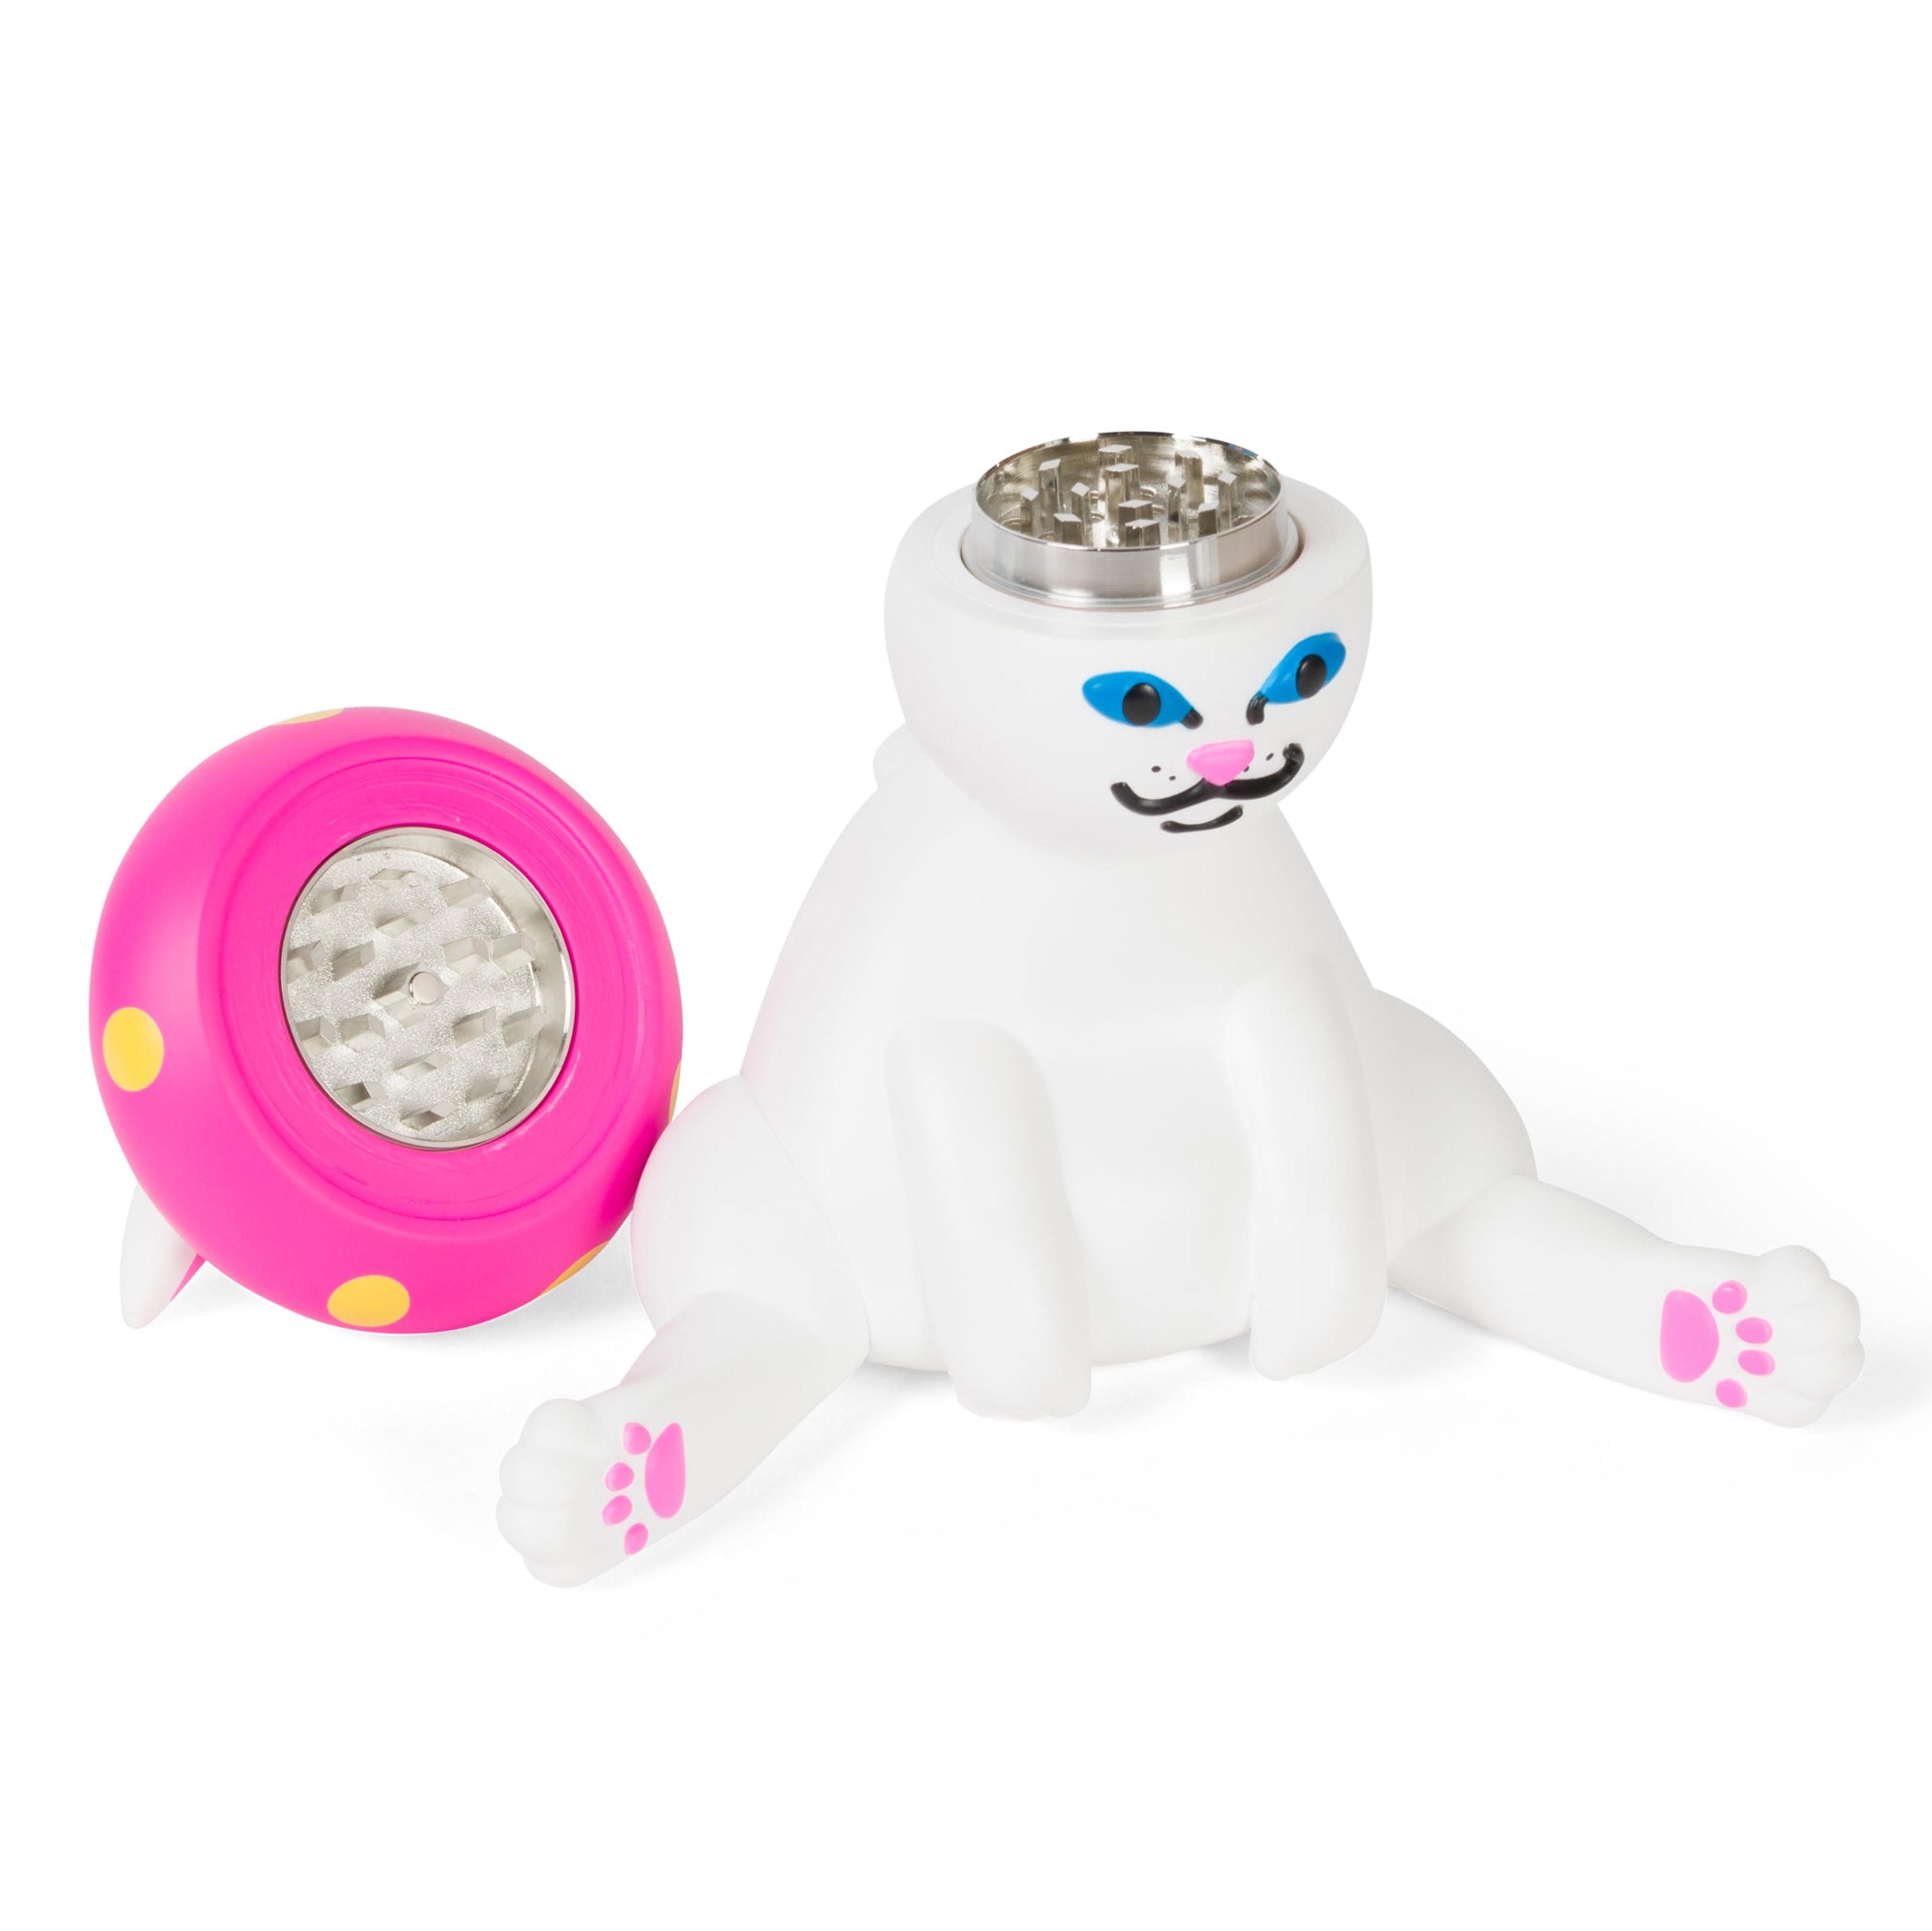 Alternate View 7 of Psychedelic Nerm Grinder (White)